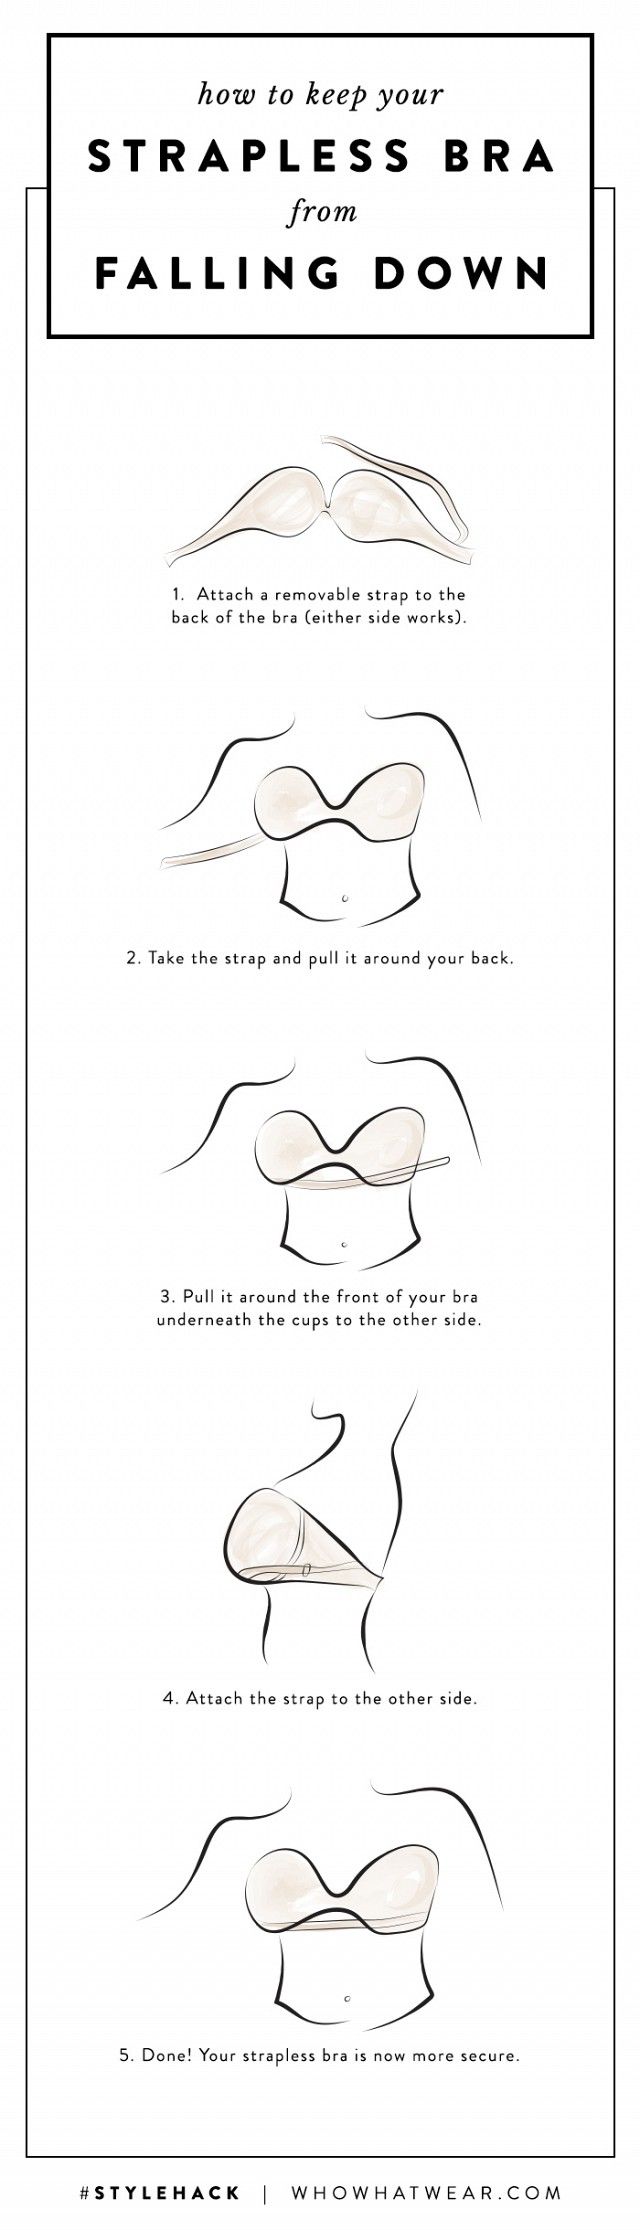 How to keep a strapless bra from falling down